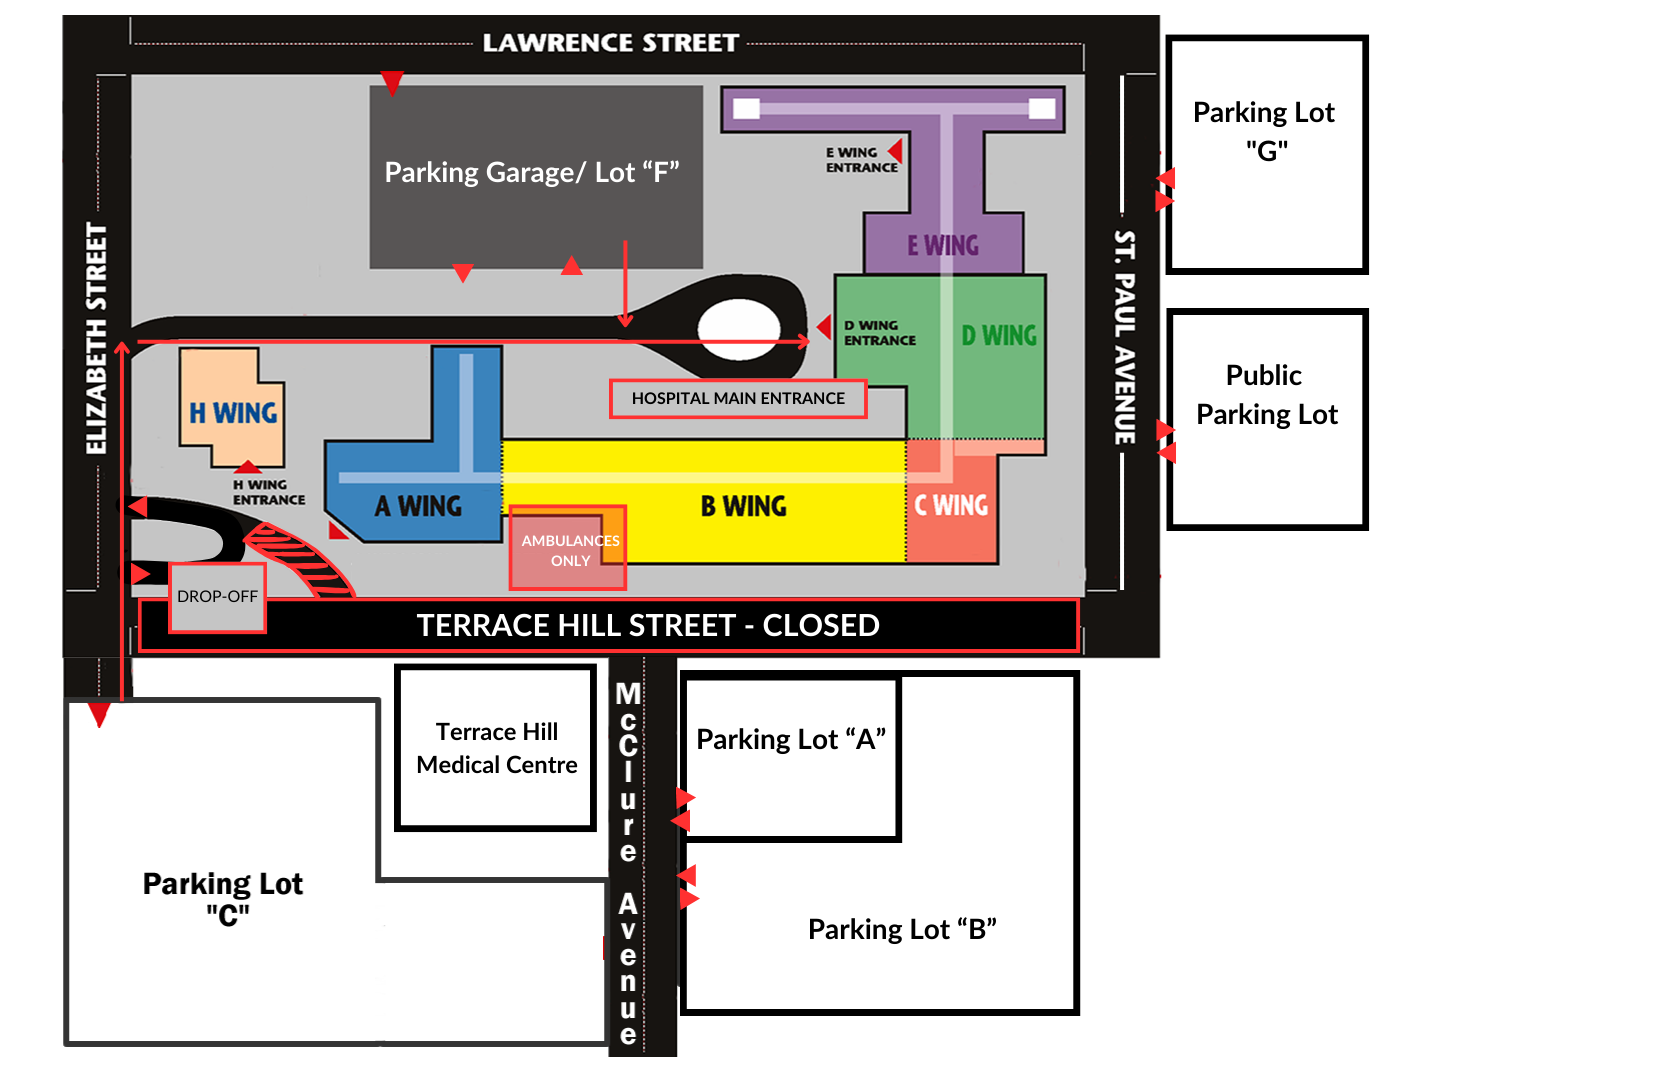 Parking lot map of BGH